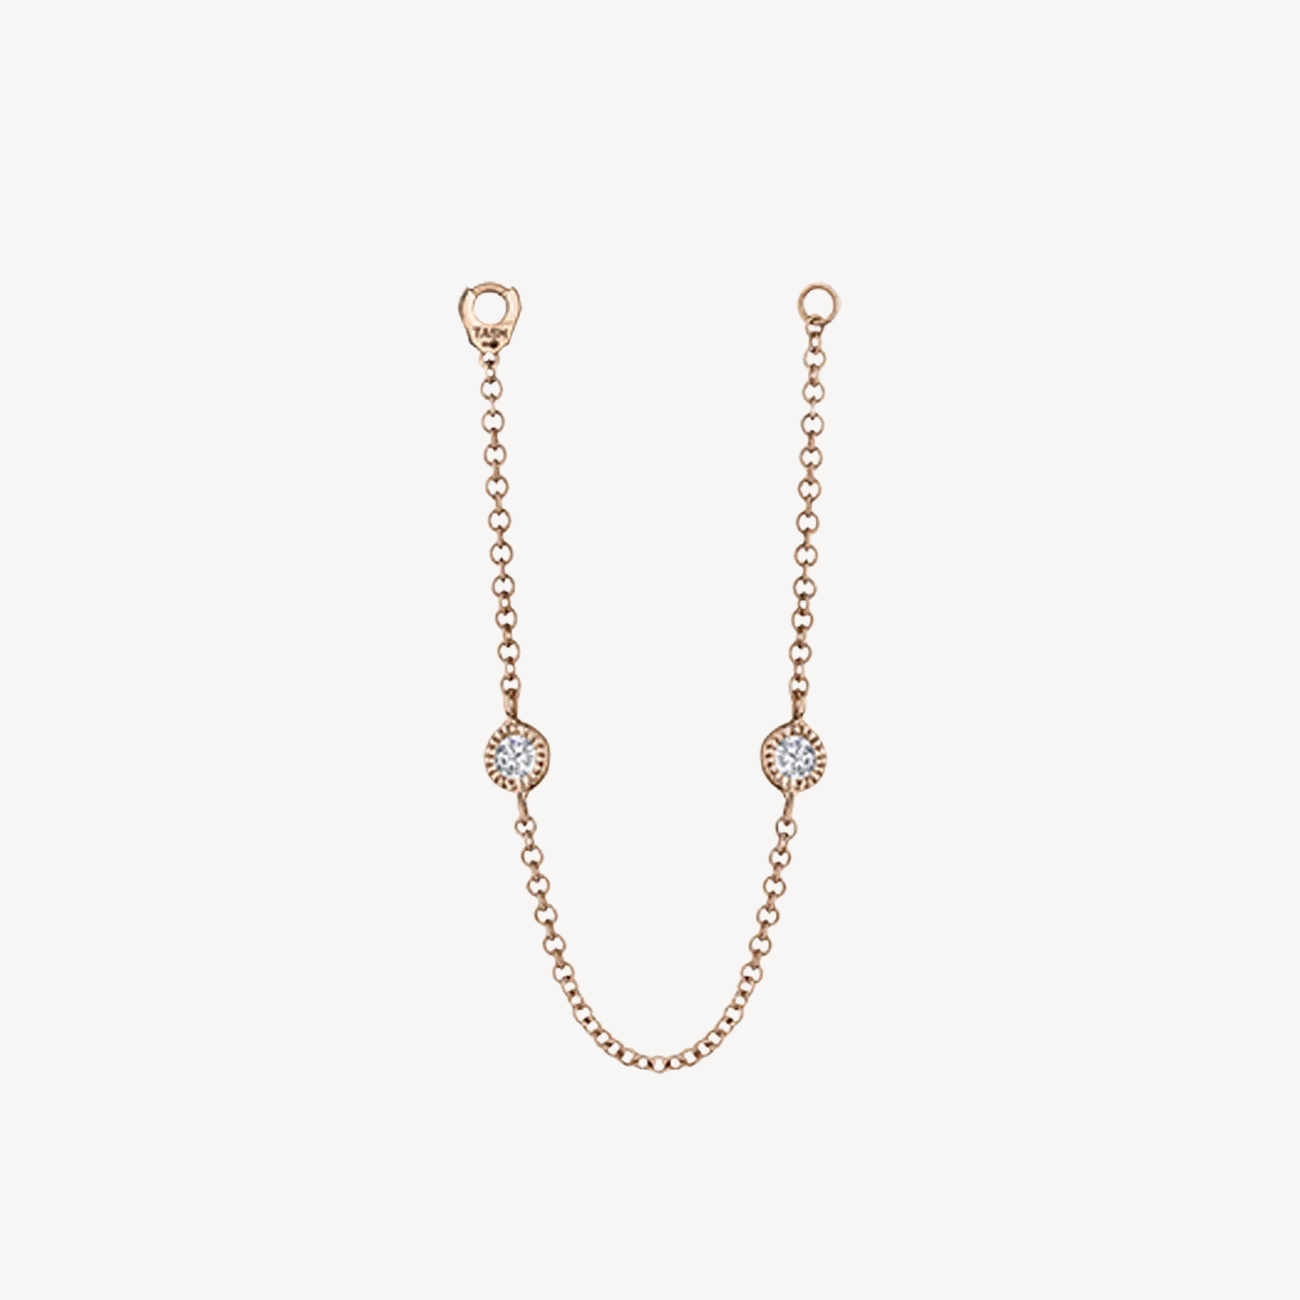 Charm Double Scallop Set Diamond Chain Connecting Or Rose